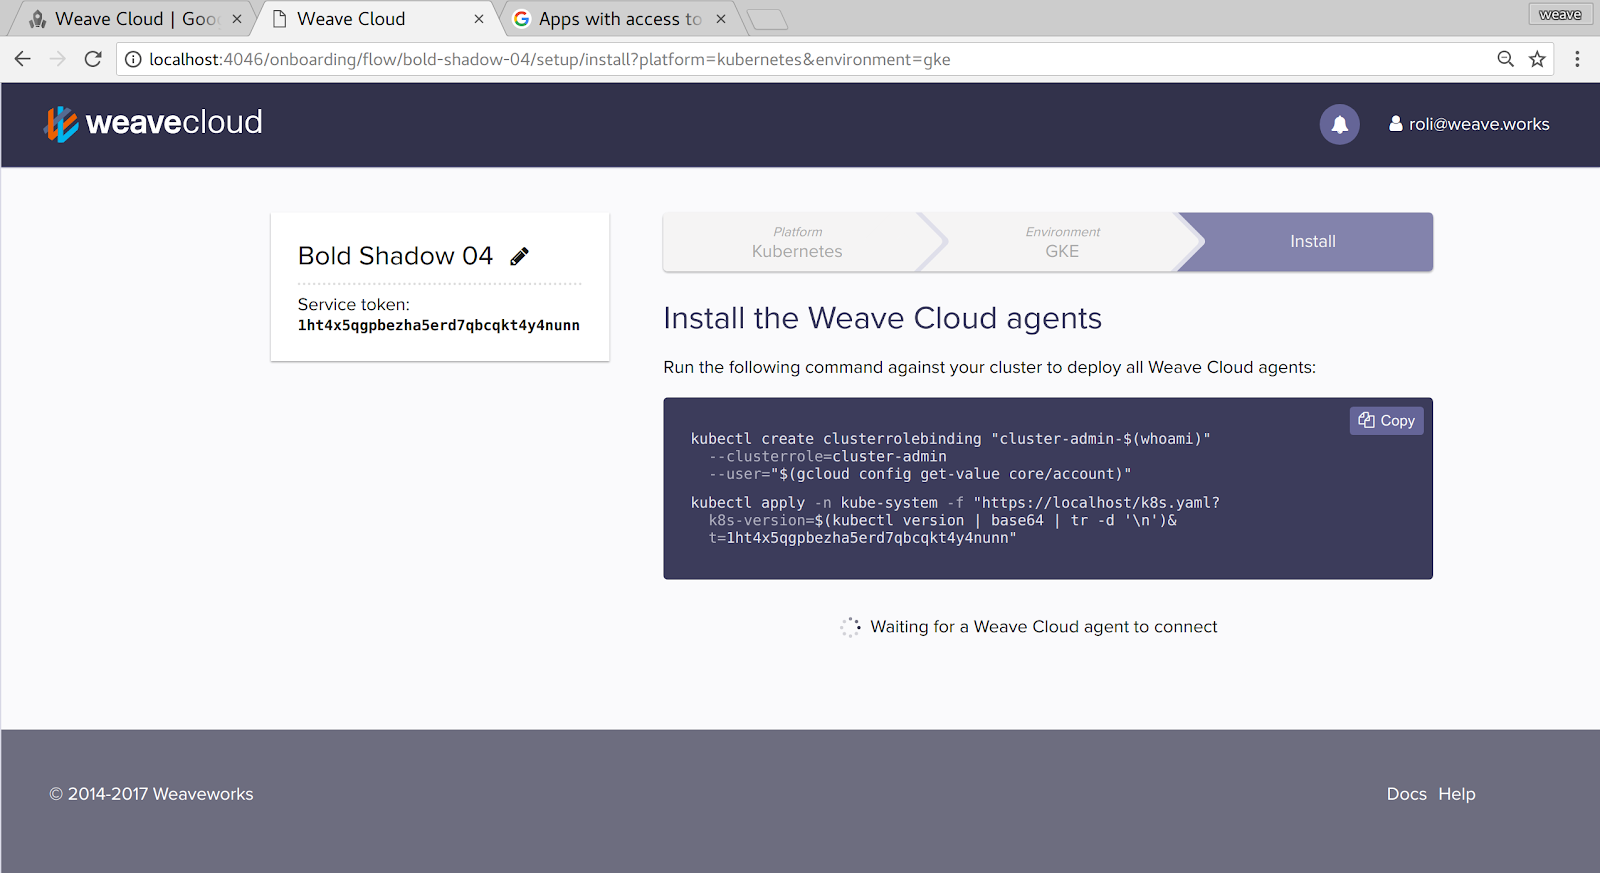 Adding Weave Cloud Agents to the Cluster